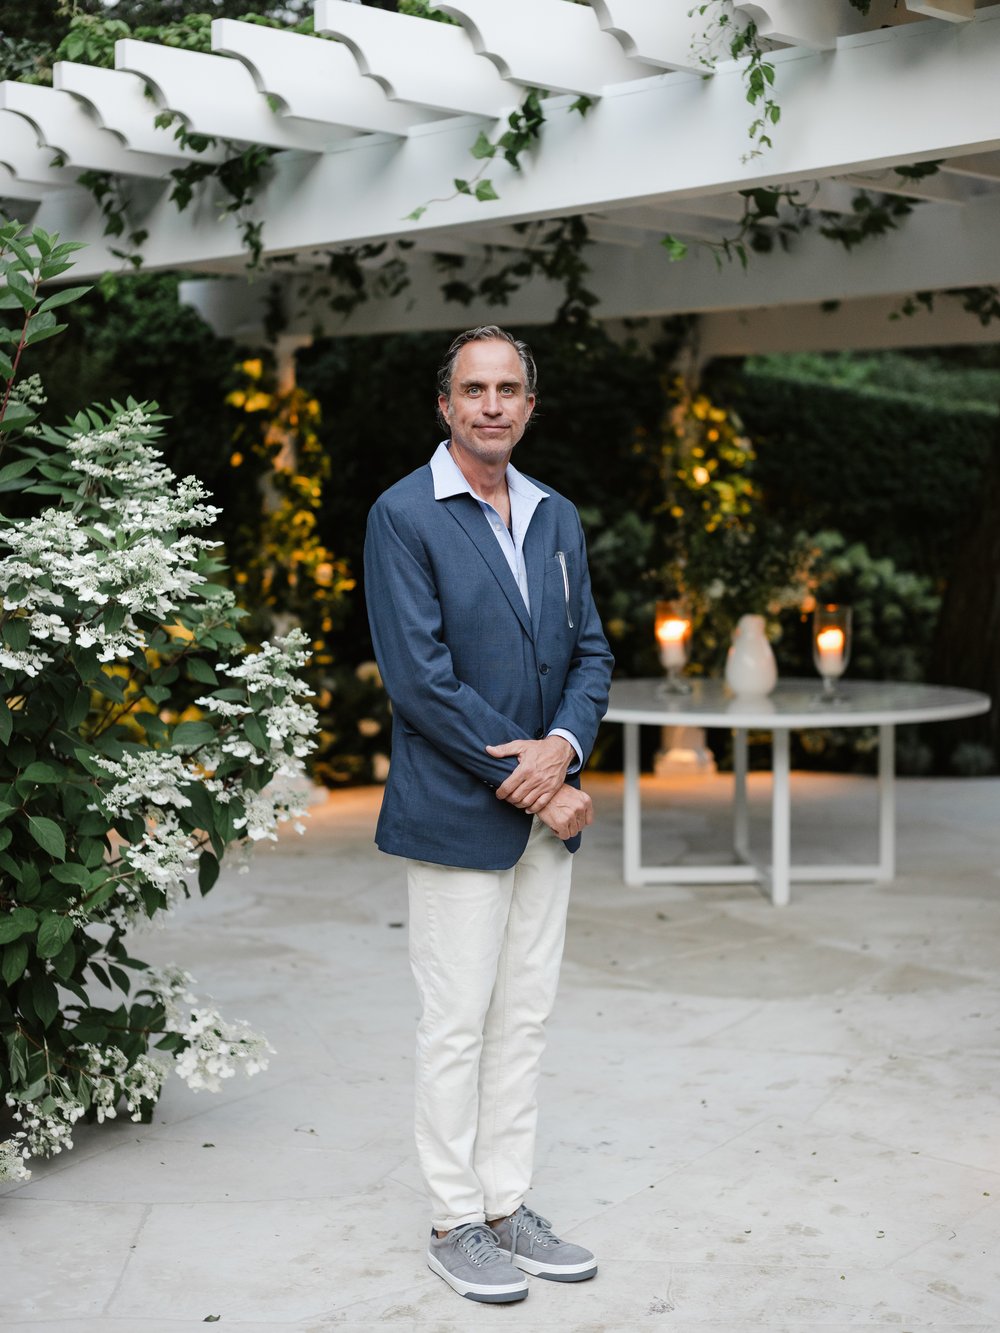    Photo: Ben Rosser/BFA.com     4/14    Michael Lomont attends An Intimate Dinner Hosted by Aerin Lauder and Amy Astley on Thursday, July 13, 2023.   